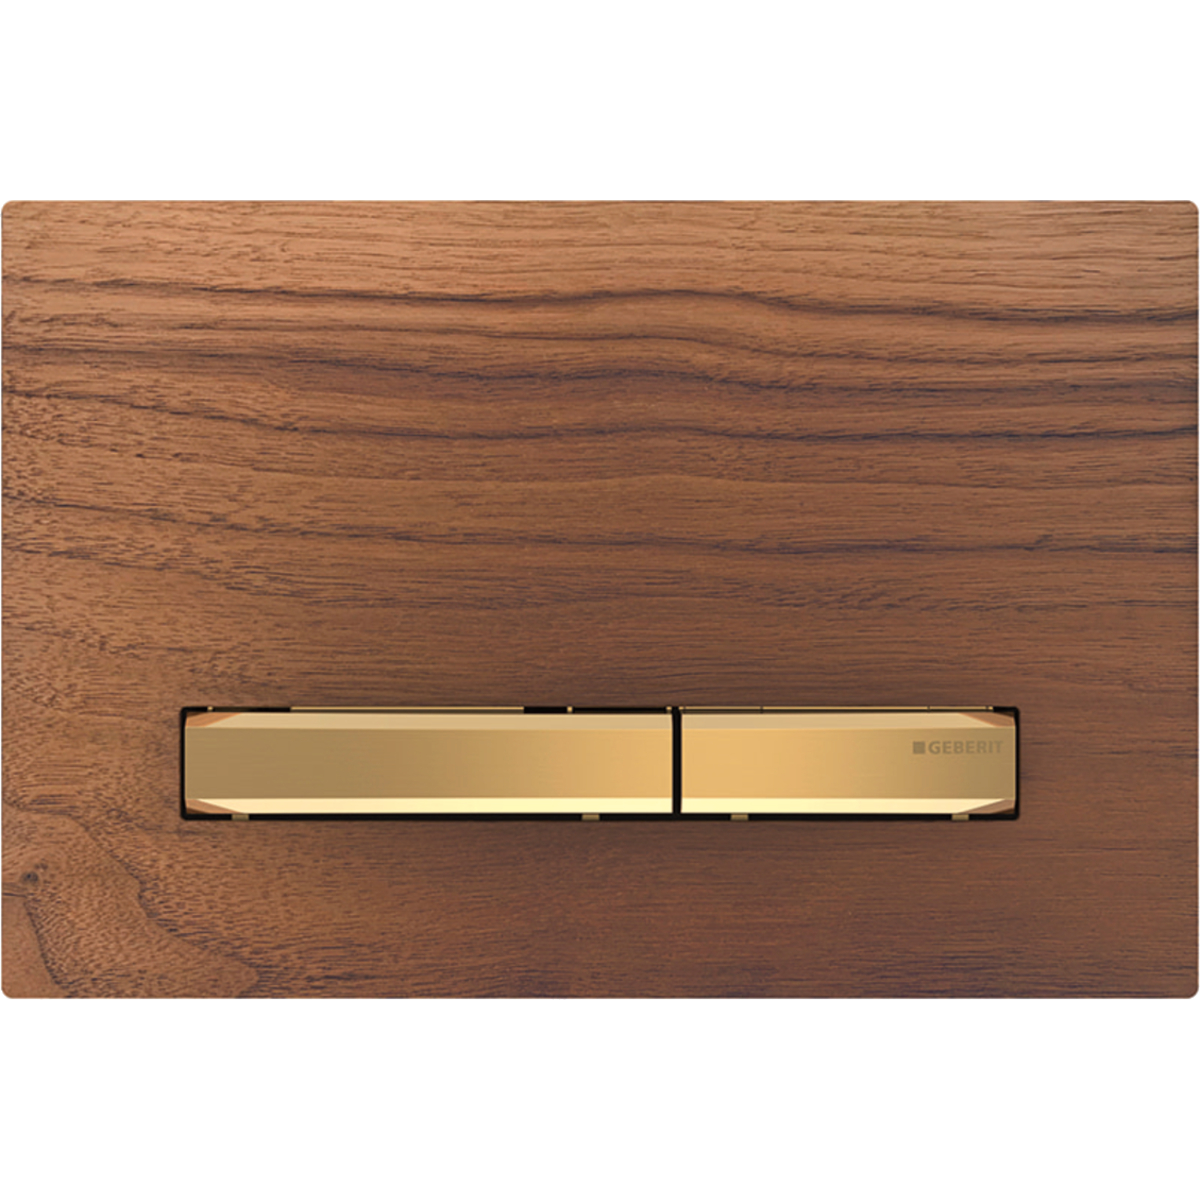 Geberit 115.672.JX.2 Actuator Plate Sigma50 for Dual Flush, Metal Colour Brass - Base Plate and Buttons: Brass/Cover Plate: Black Walnut